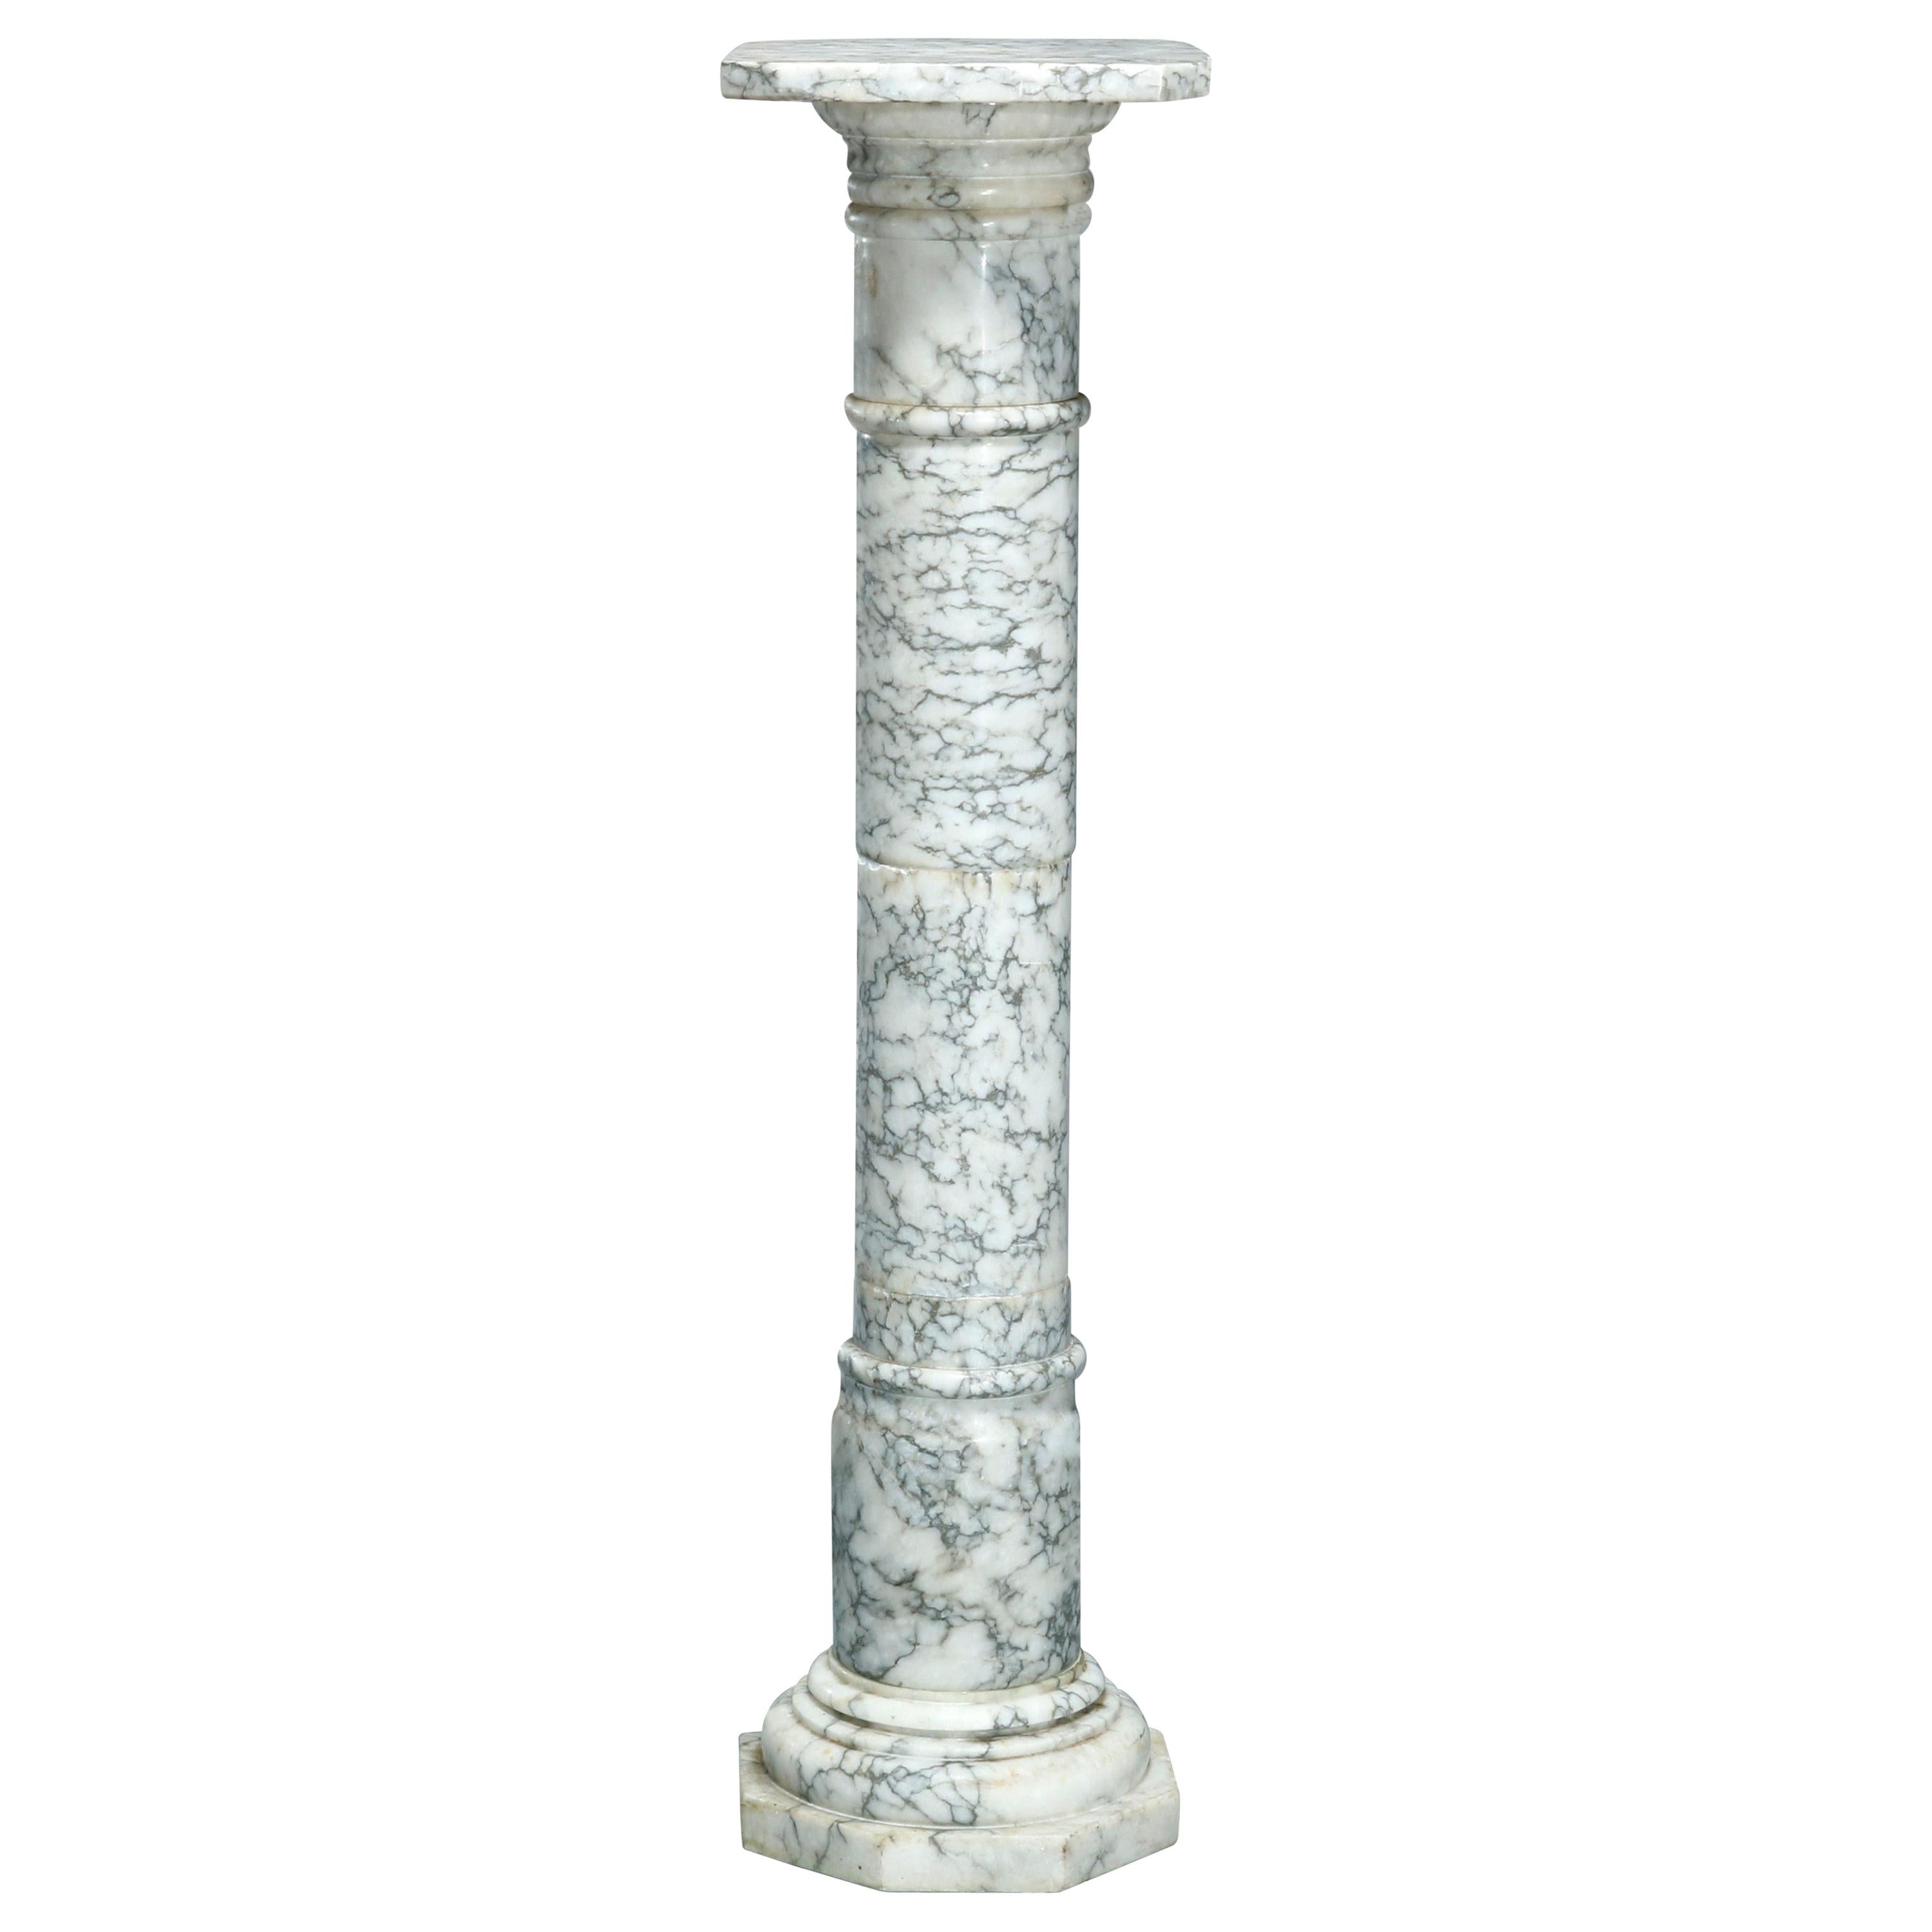 Antique Neo-Classical Variegated Marble Sculpture Display Pedestal, circa 1900